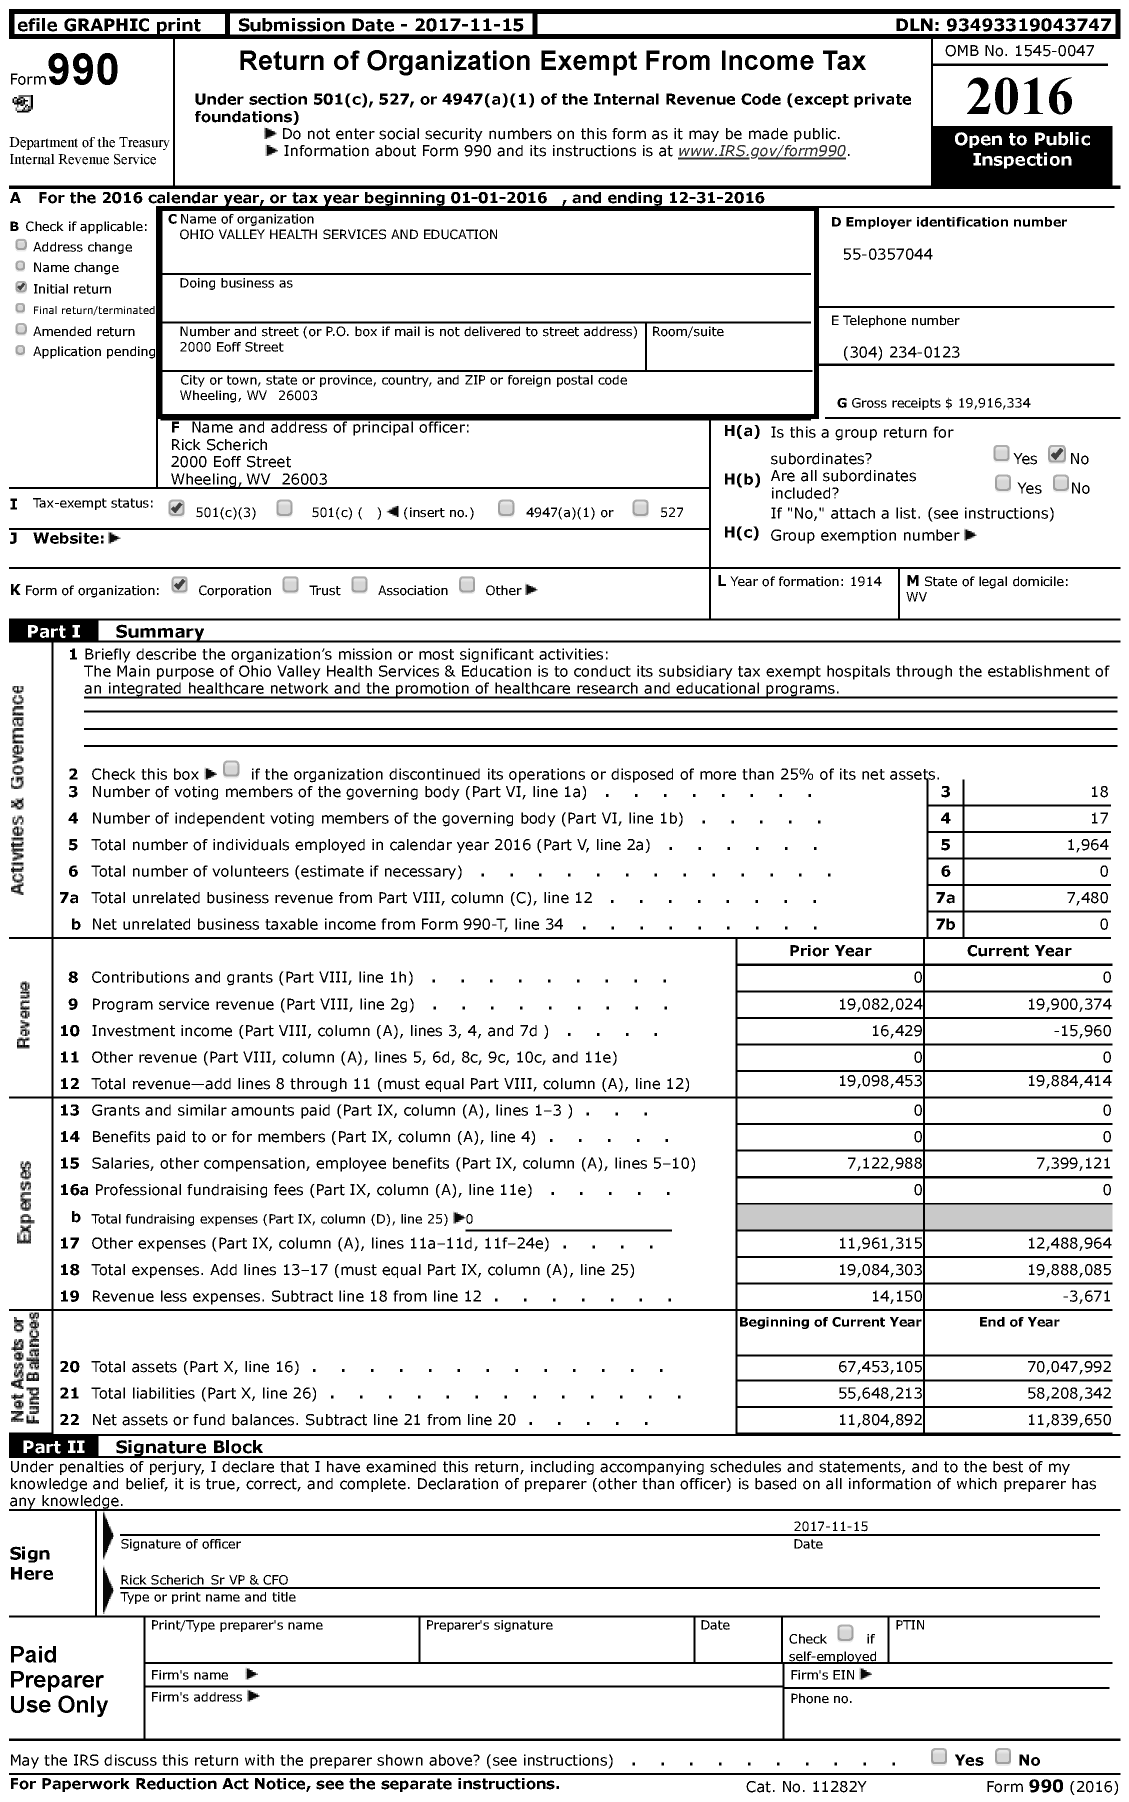 Image of first page of 2016 Form 990 for Ohio Valley Health Services & Education (OVHSE)